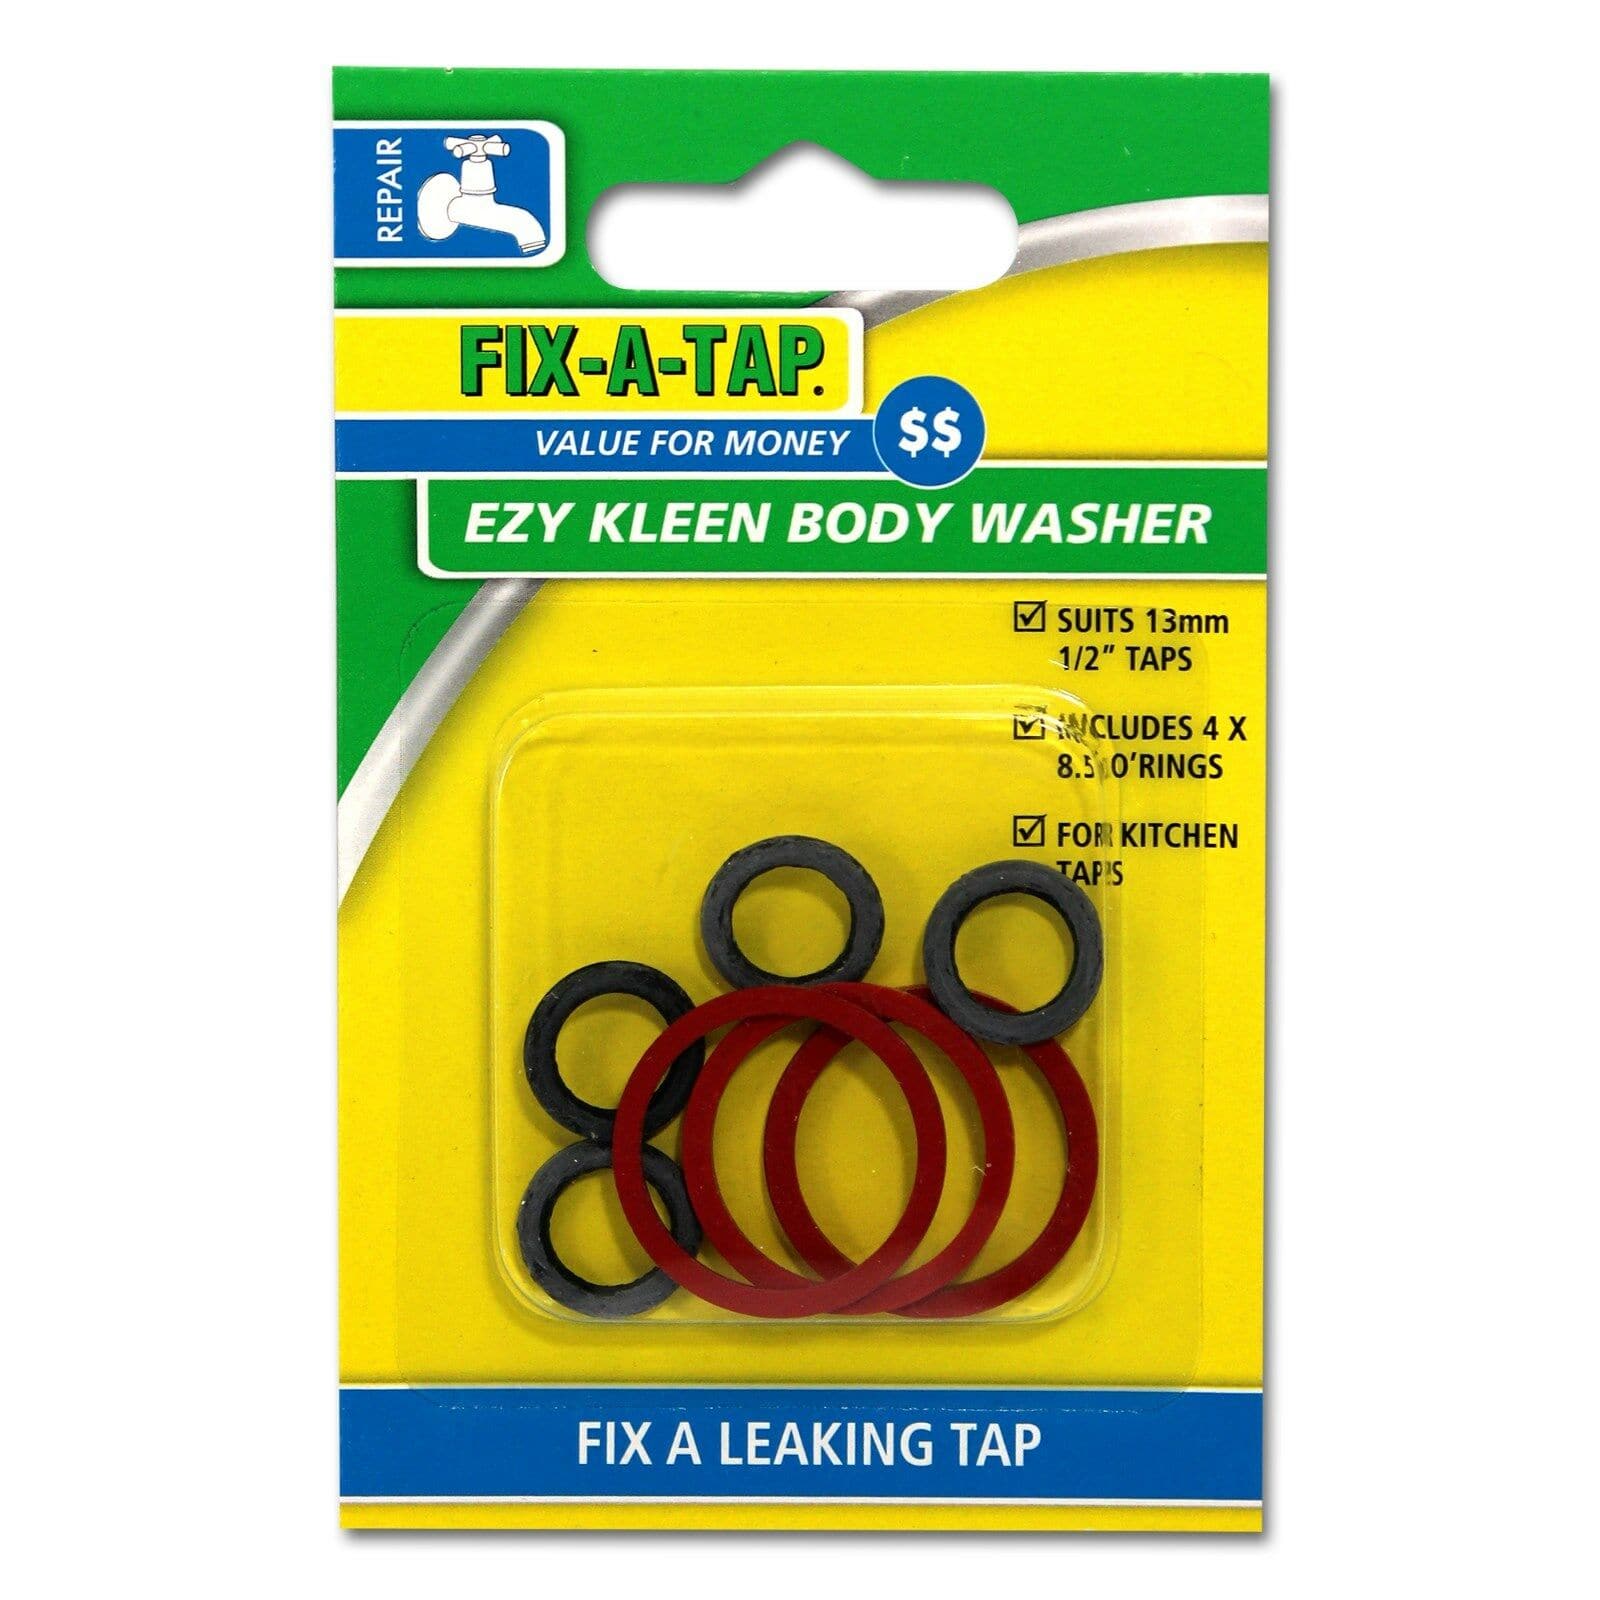 FIX-A-TAP Ezy Kleen Washers Suits 13mm(1/2") Taps 221124 - Double Bay Hardware